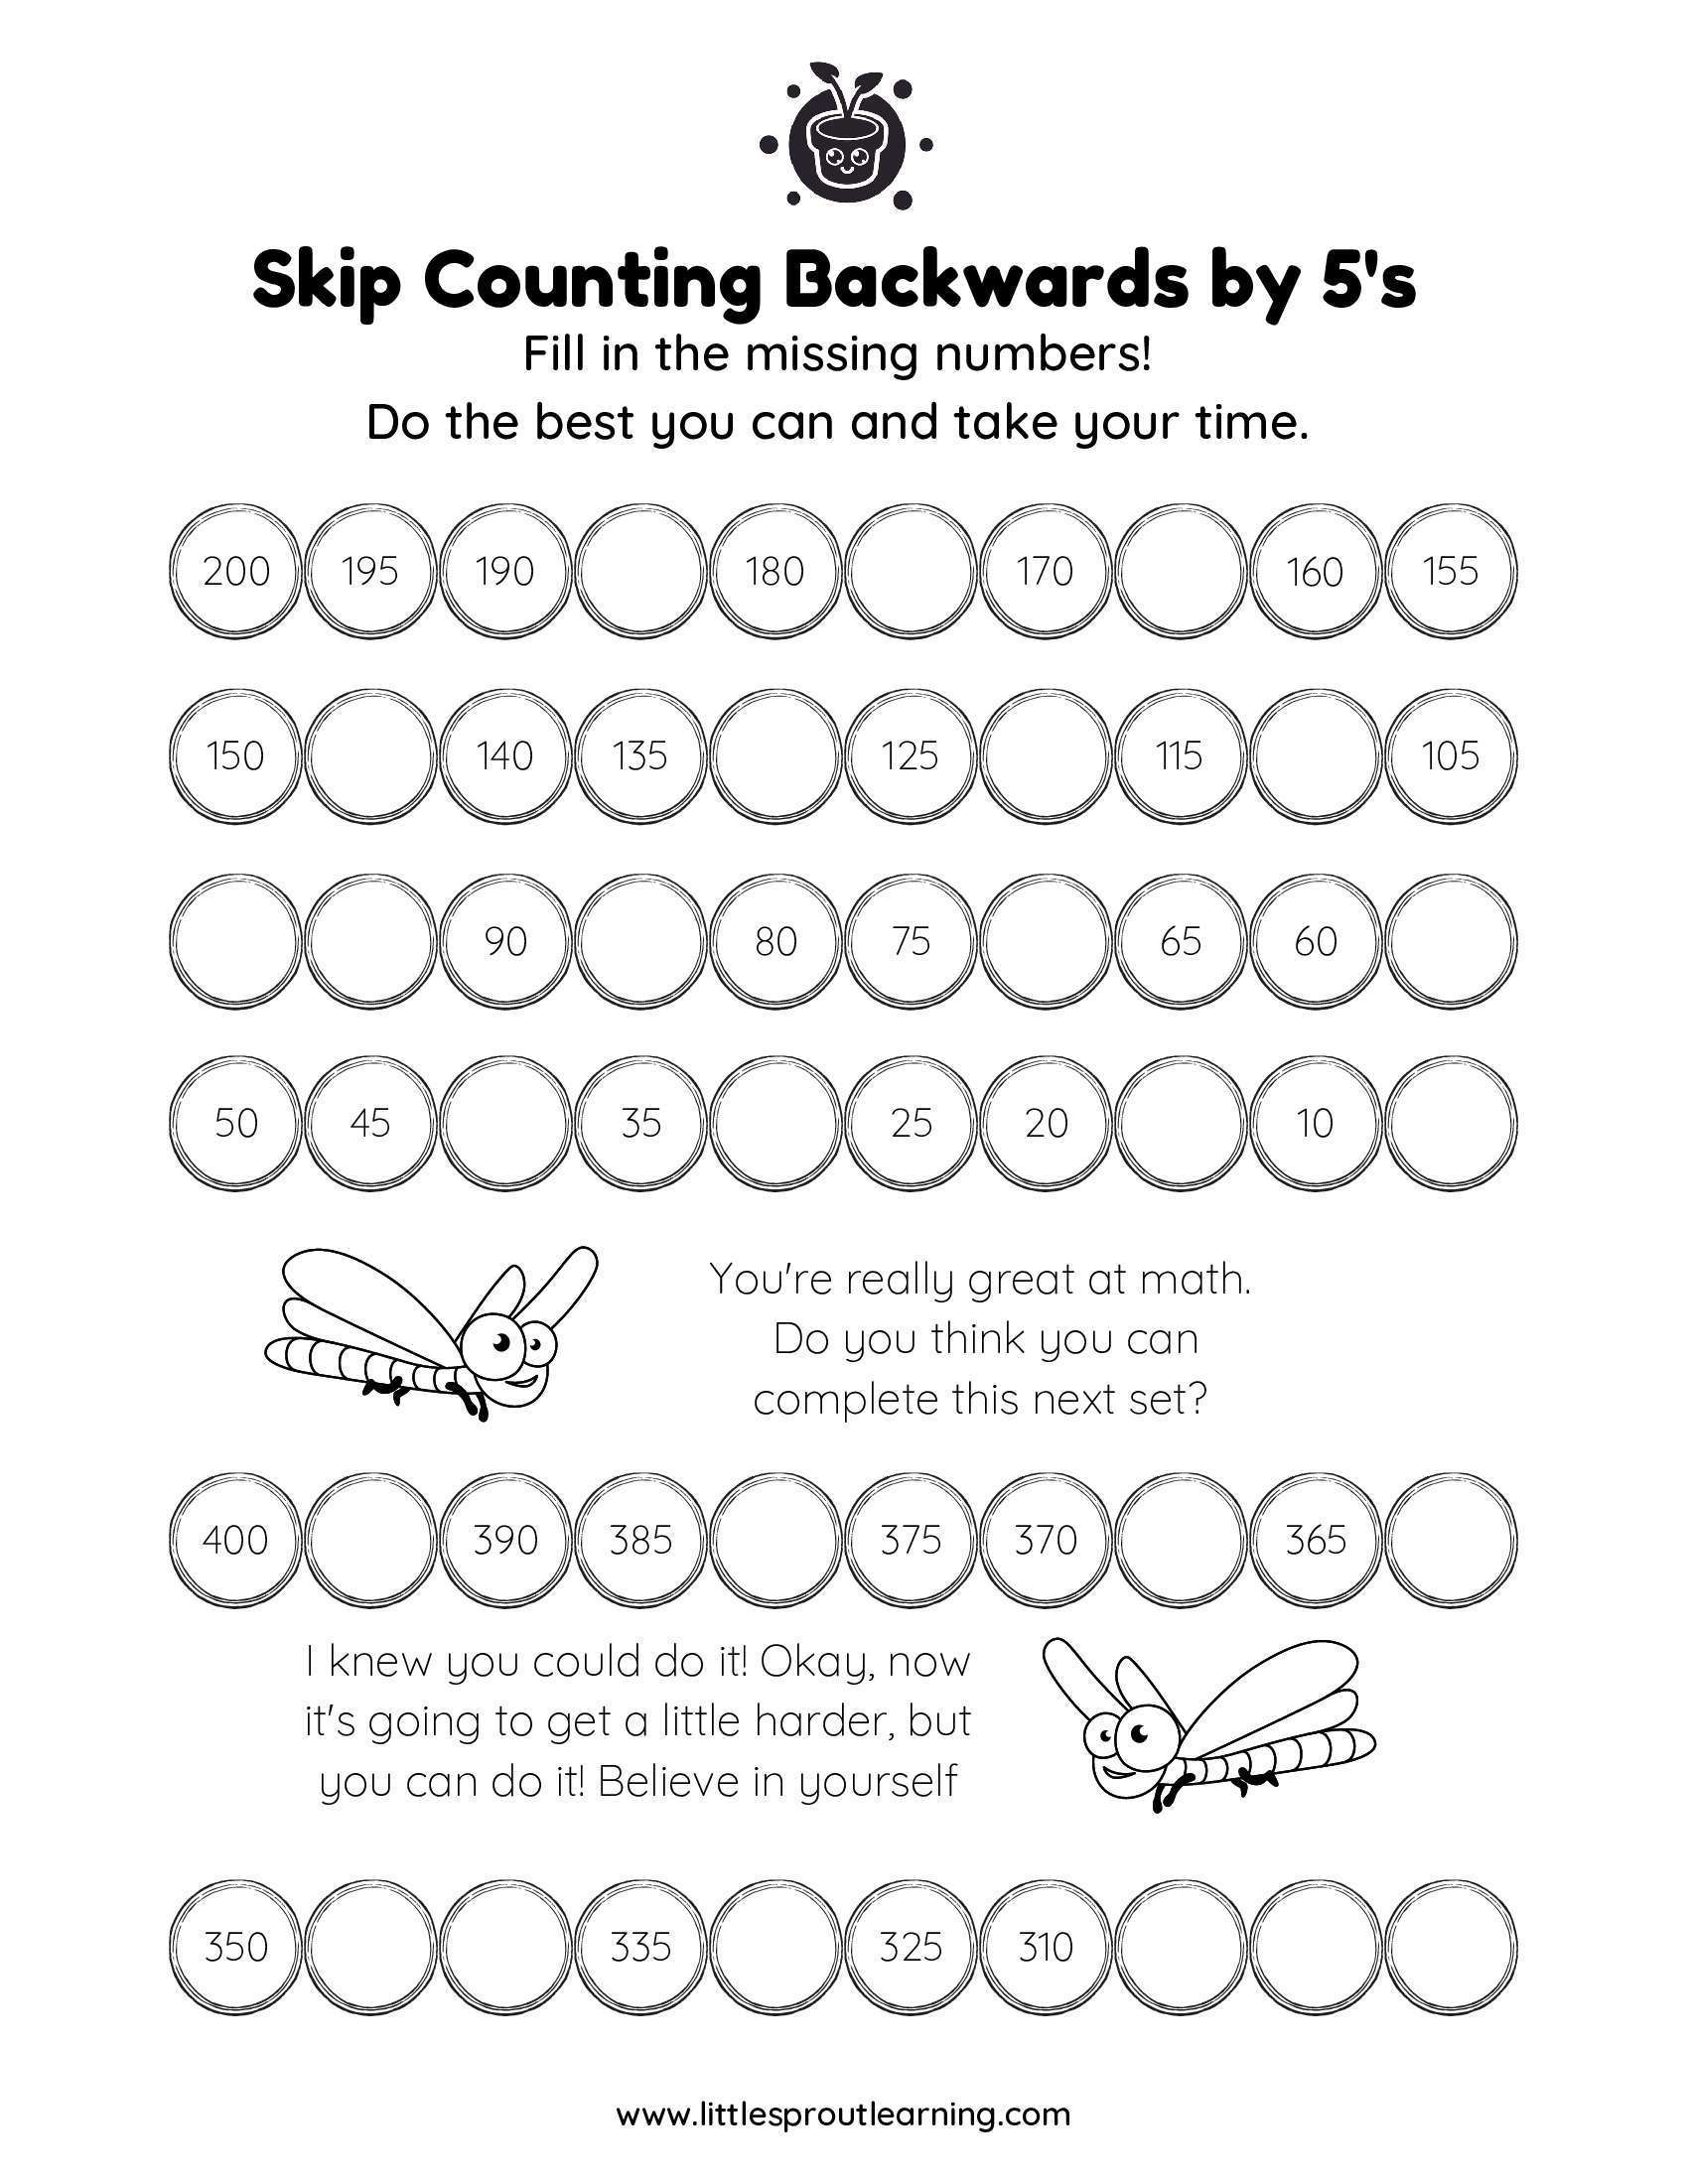 Skip Counting Backwards by 5’s